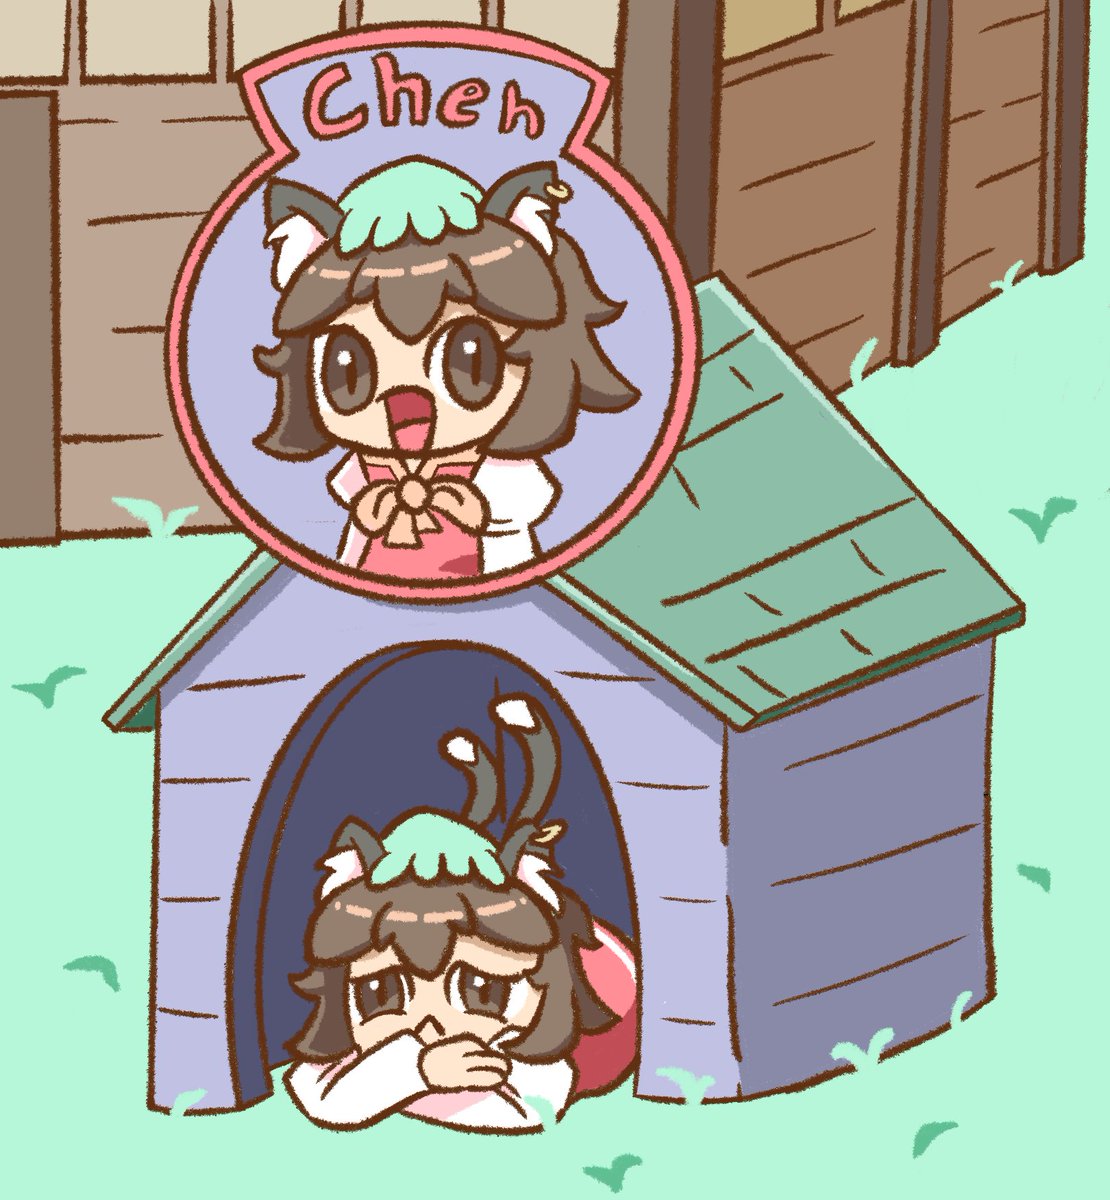 Chen accidentally attacked someone in the open so Ran sent her outside to her Chen House